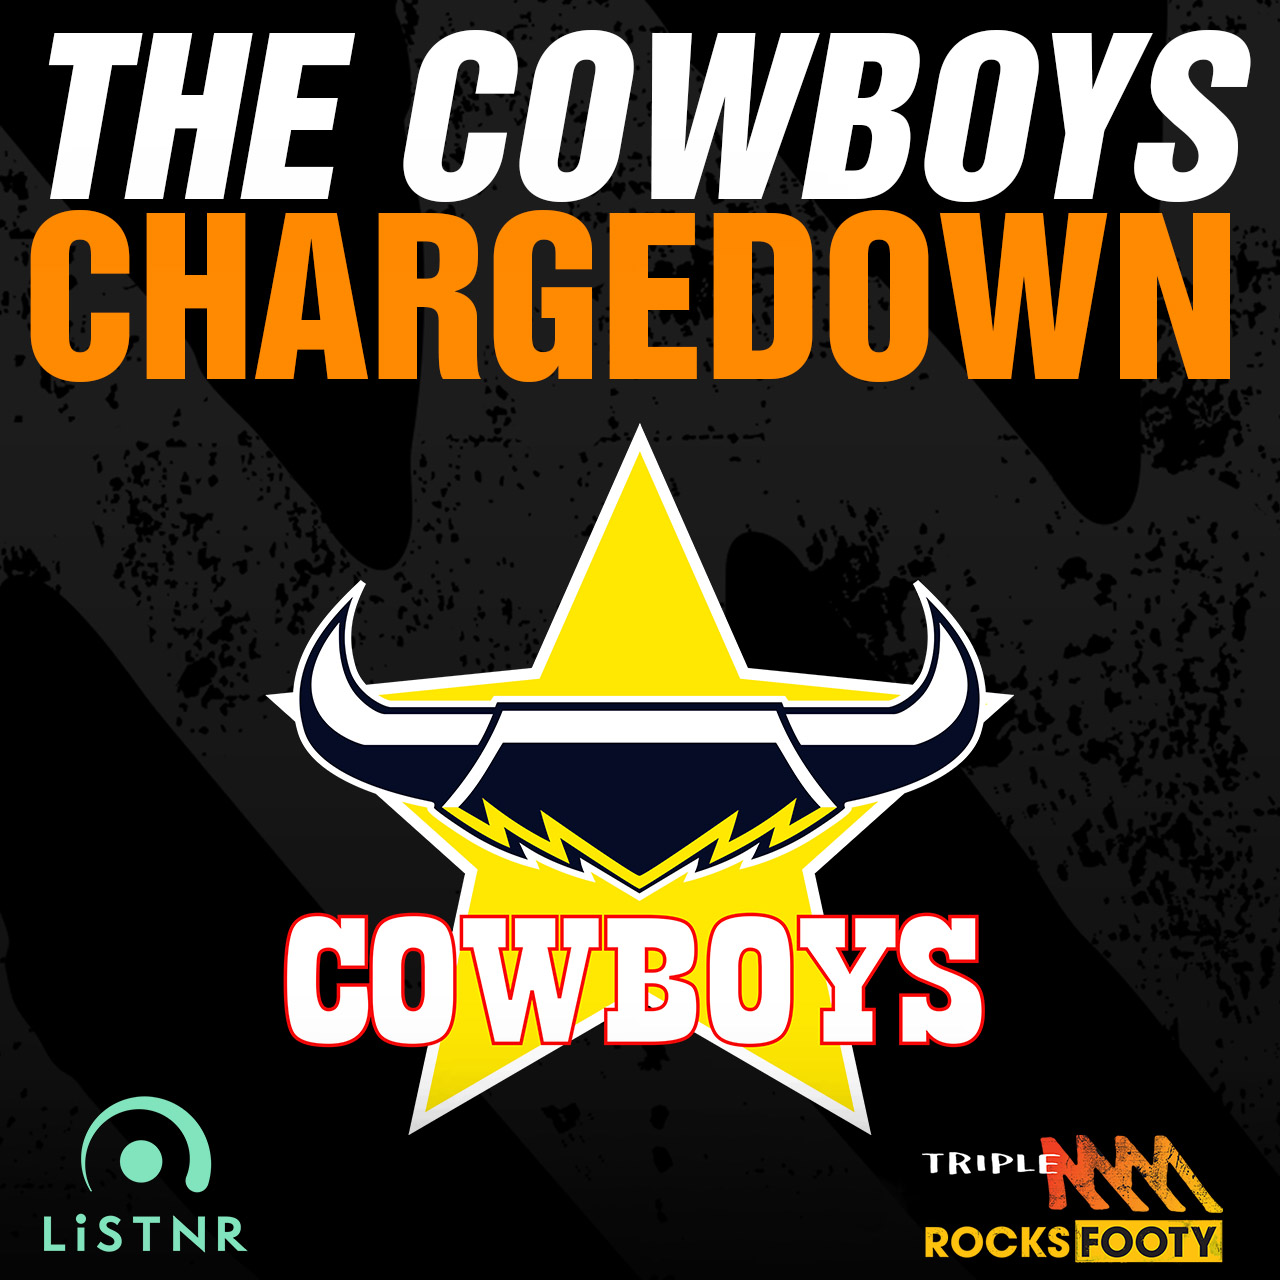 Cowboys Chargedown Round 2 Review